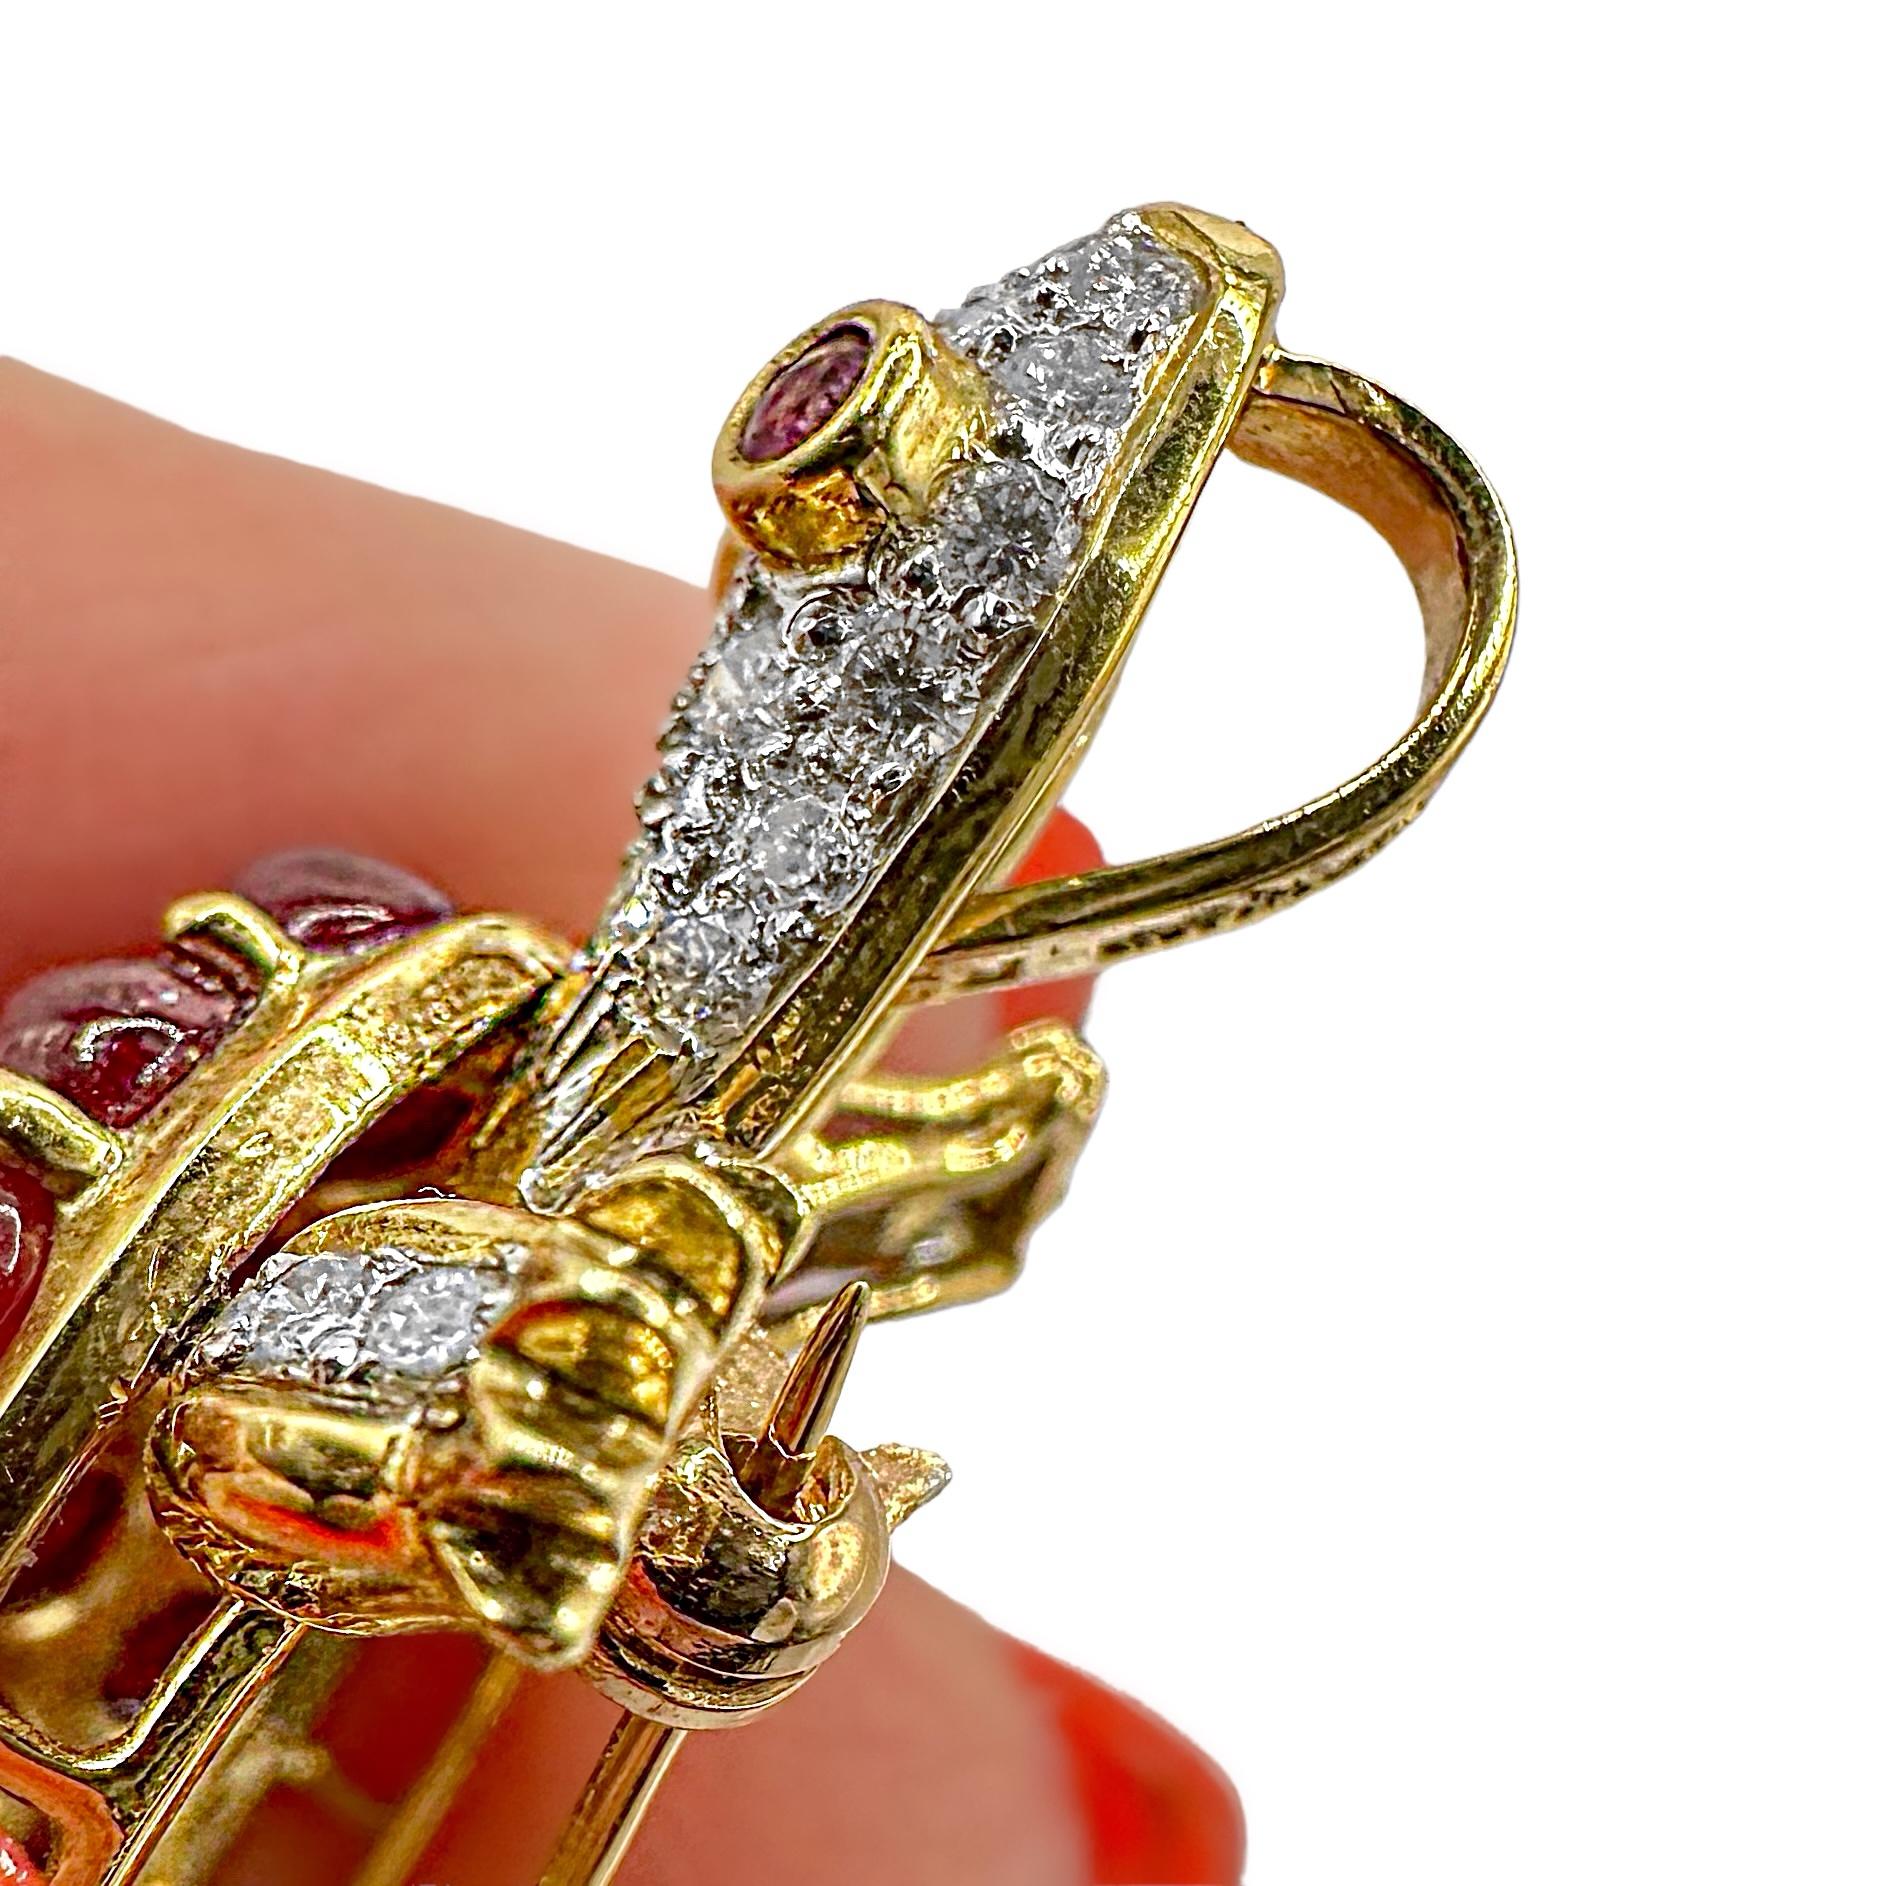 Adorable Turtle Brooch/Pendant with Motion in 18K Gold, Diamonds, and Rubies For Sale 7